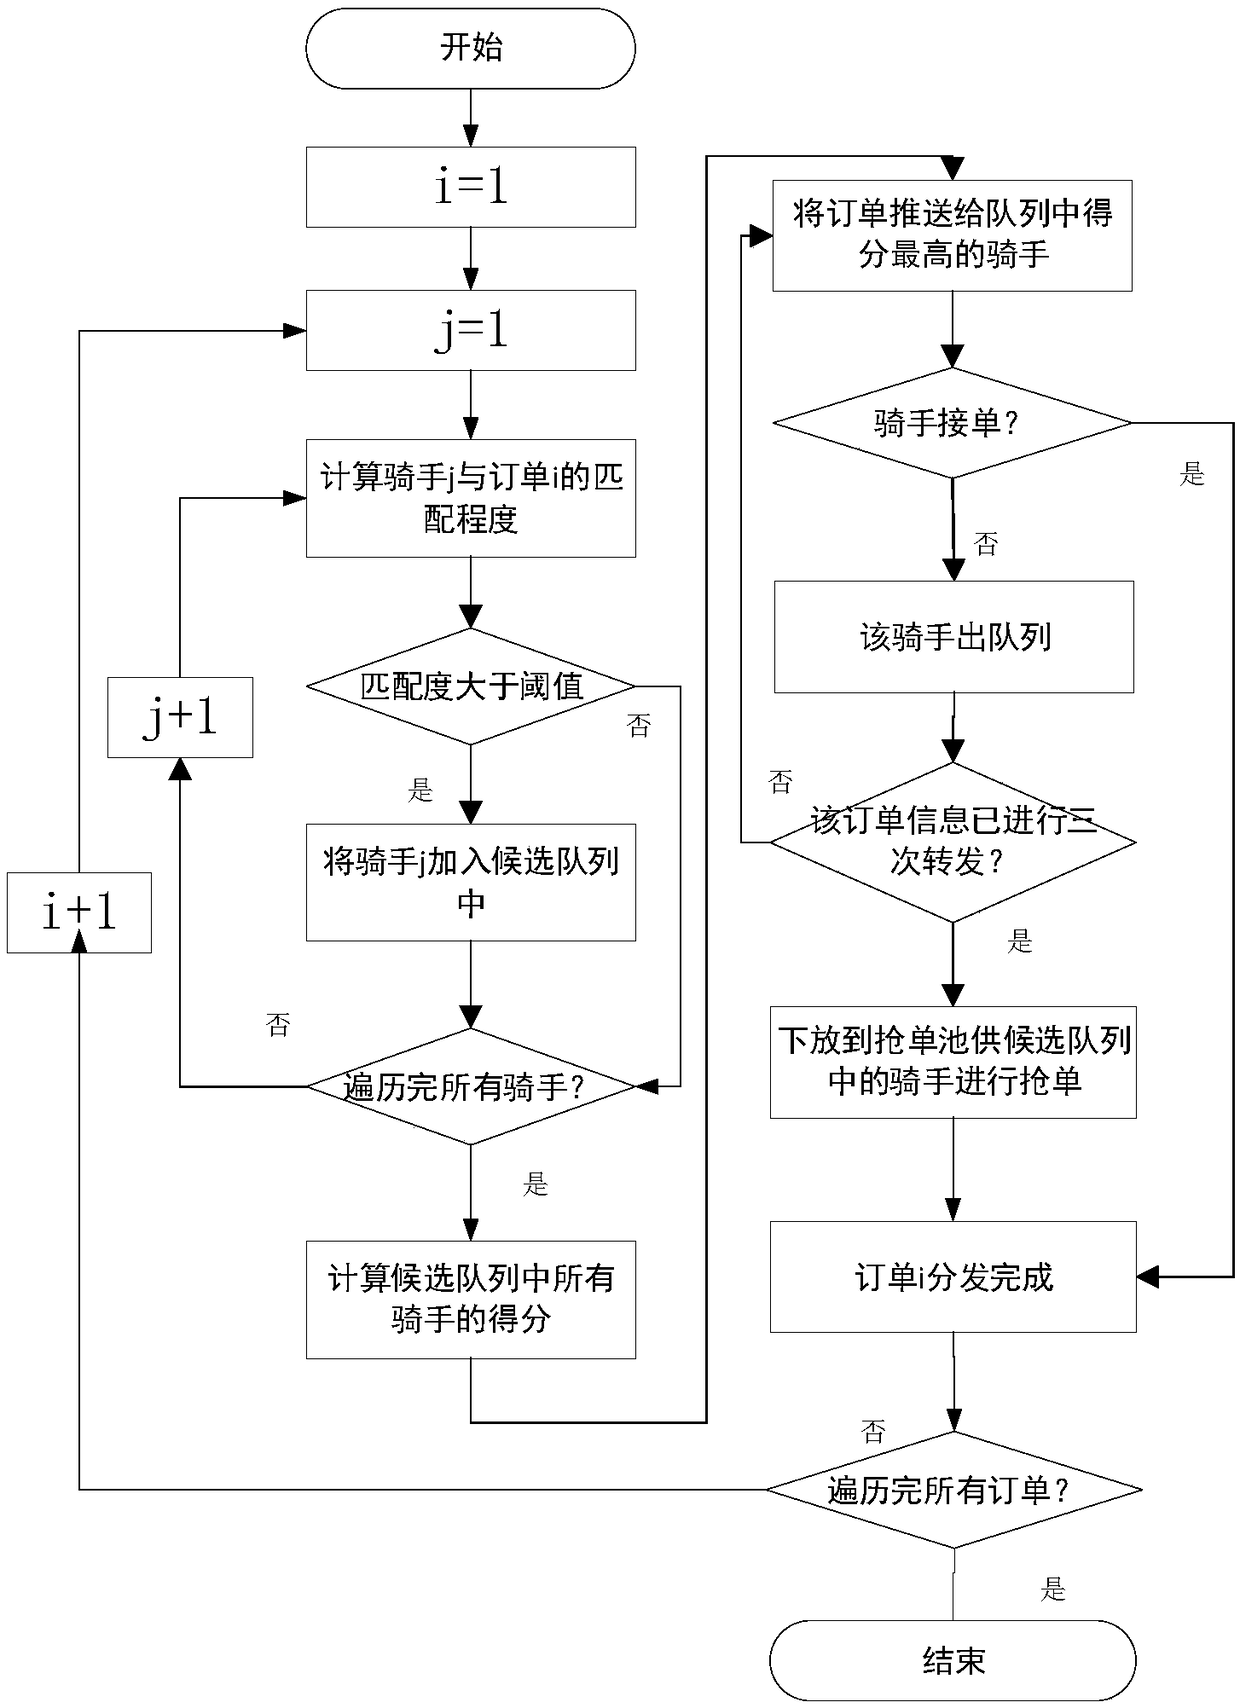 An online order distribution and delivery method based on a scoring mechanism and route planning